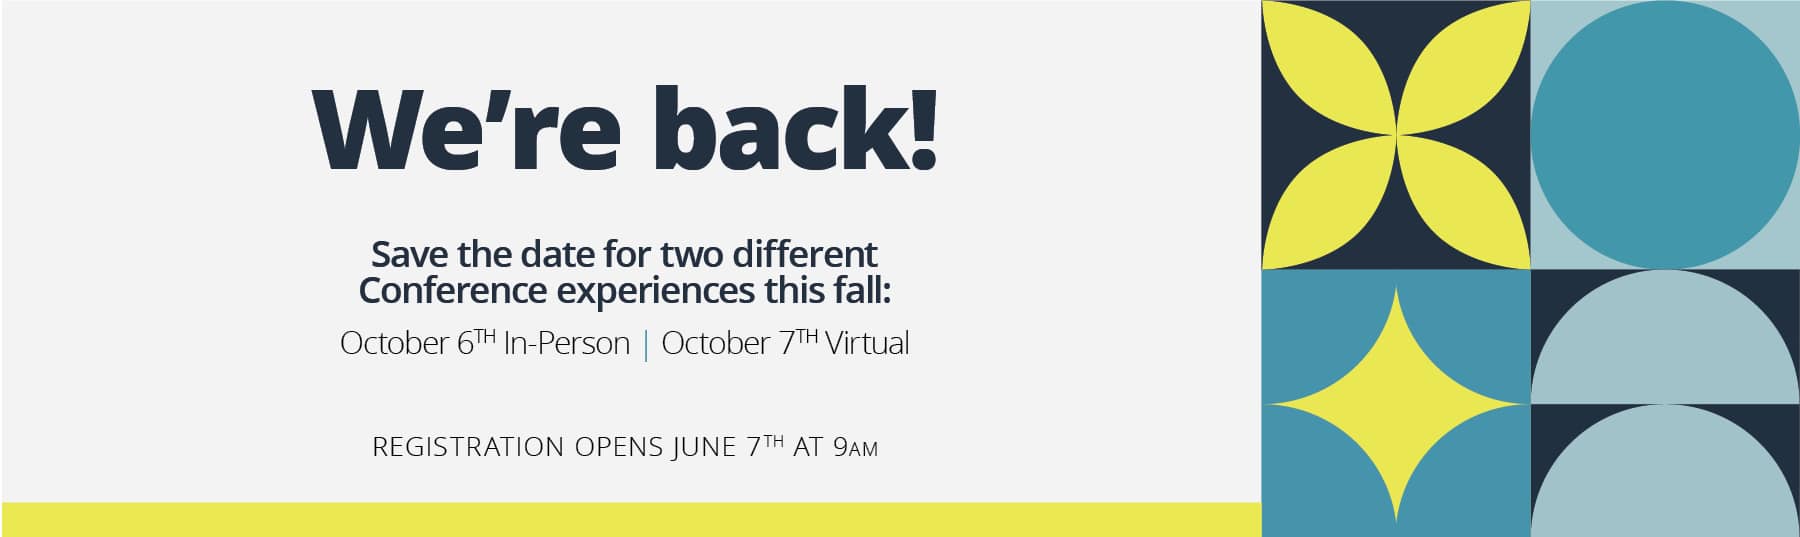 We're back! Save the date for our October 6th in-person and October 7th virtual Conferences!